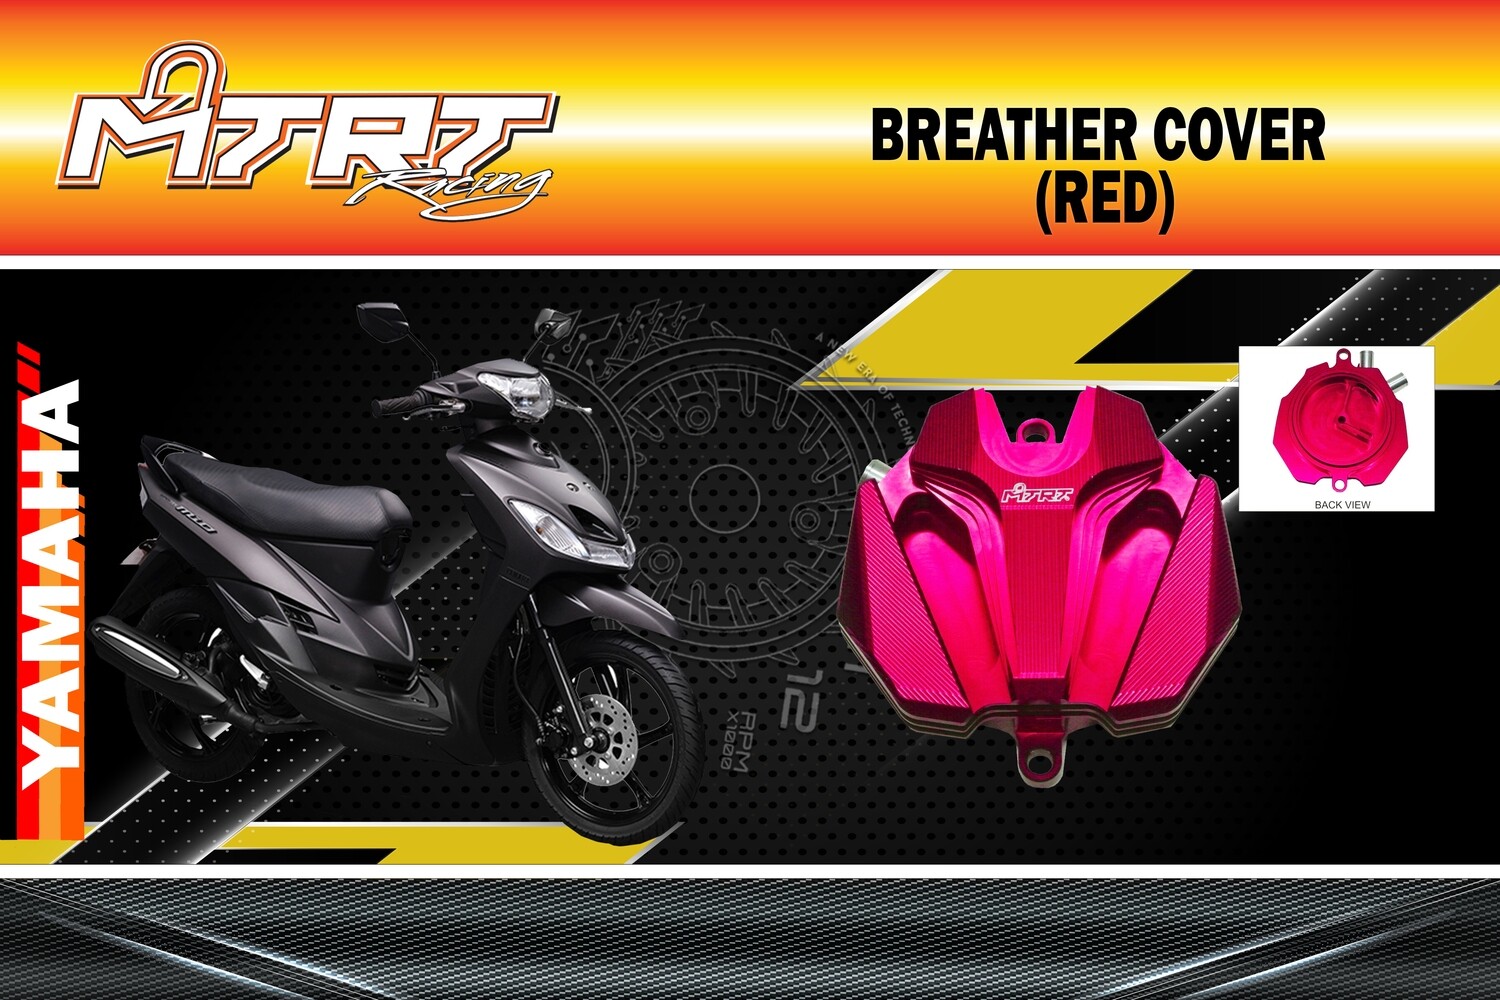 BREATHER COVER (RED) TRANSFORMER MTRT